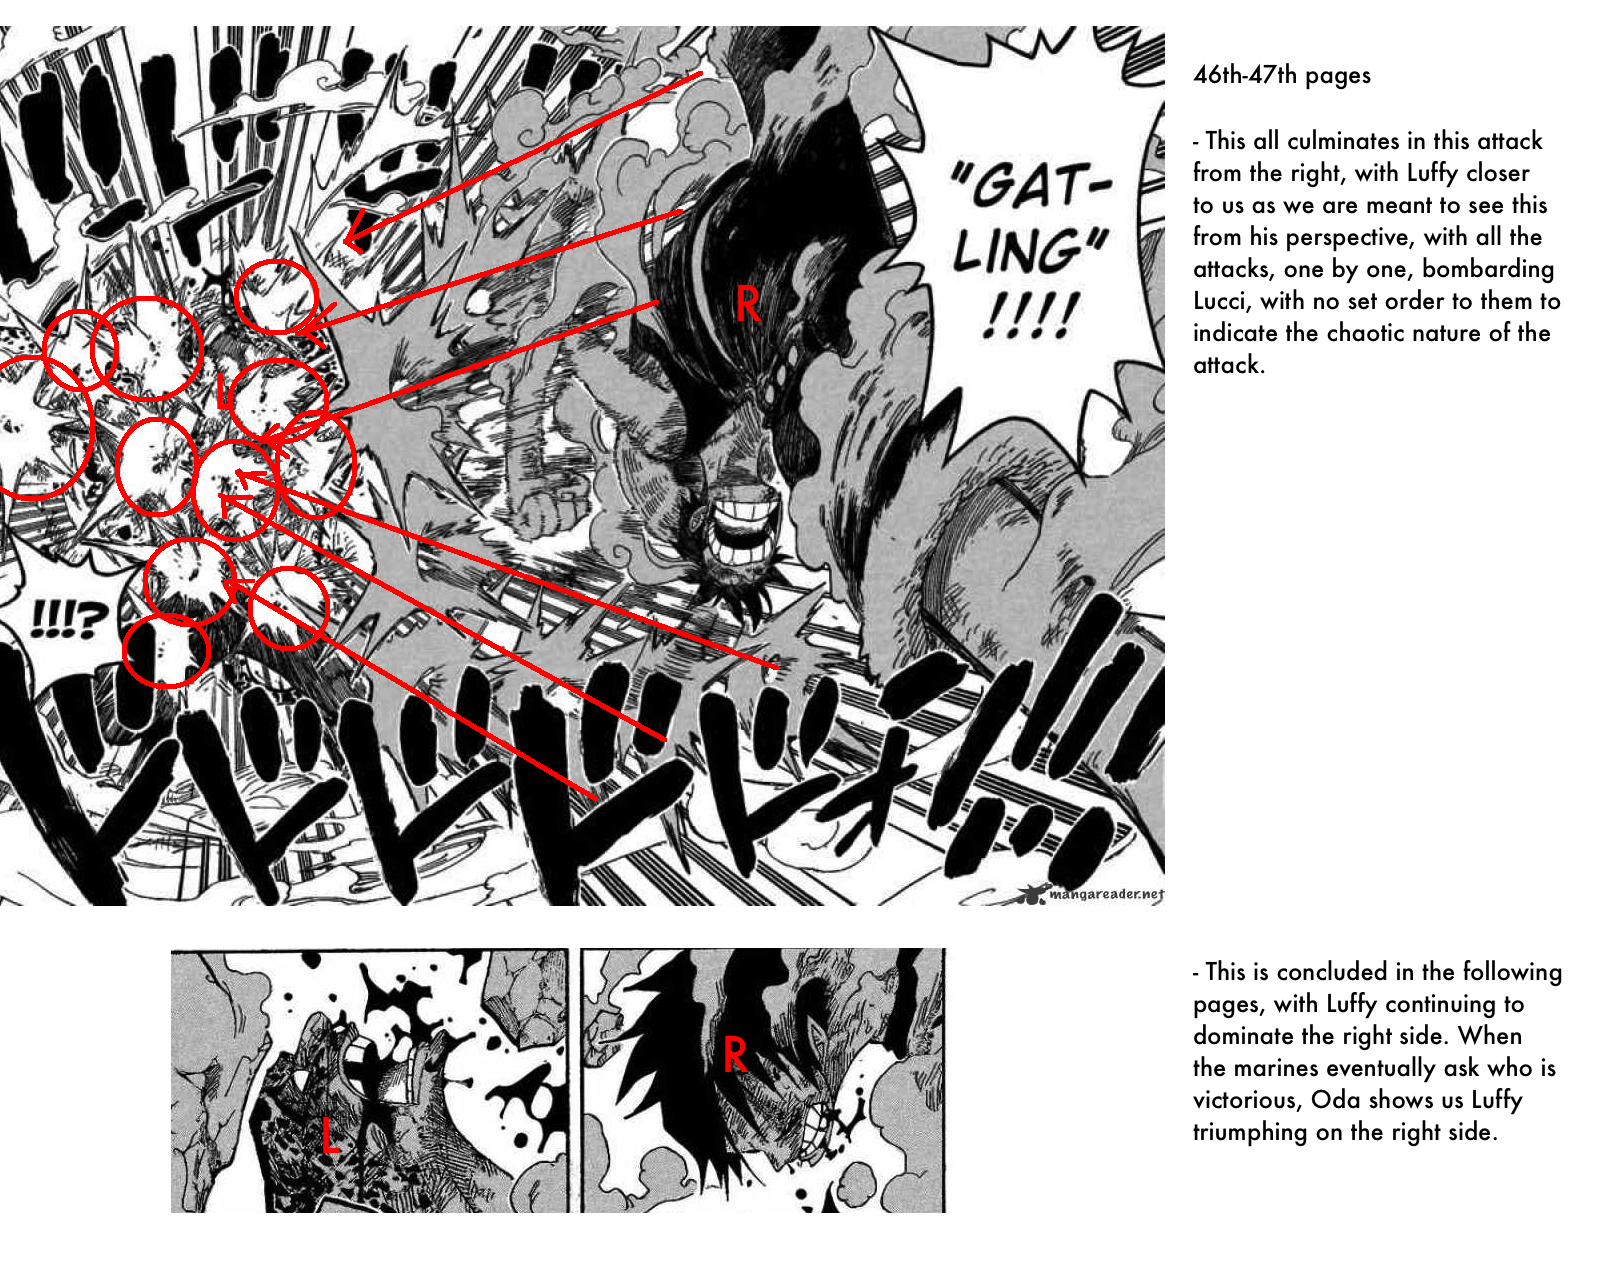 Luffy Vs Rob Lucci Manga The Importance of Paneling in One Piece: Luffy vs Lucci – The Library of  Ohara